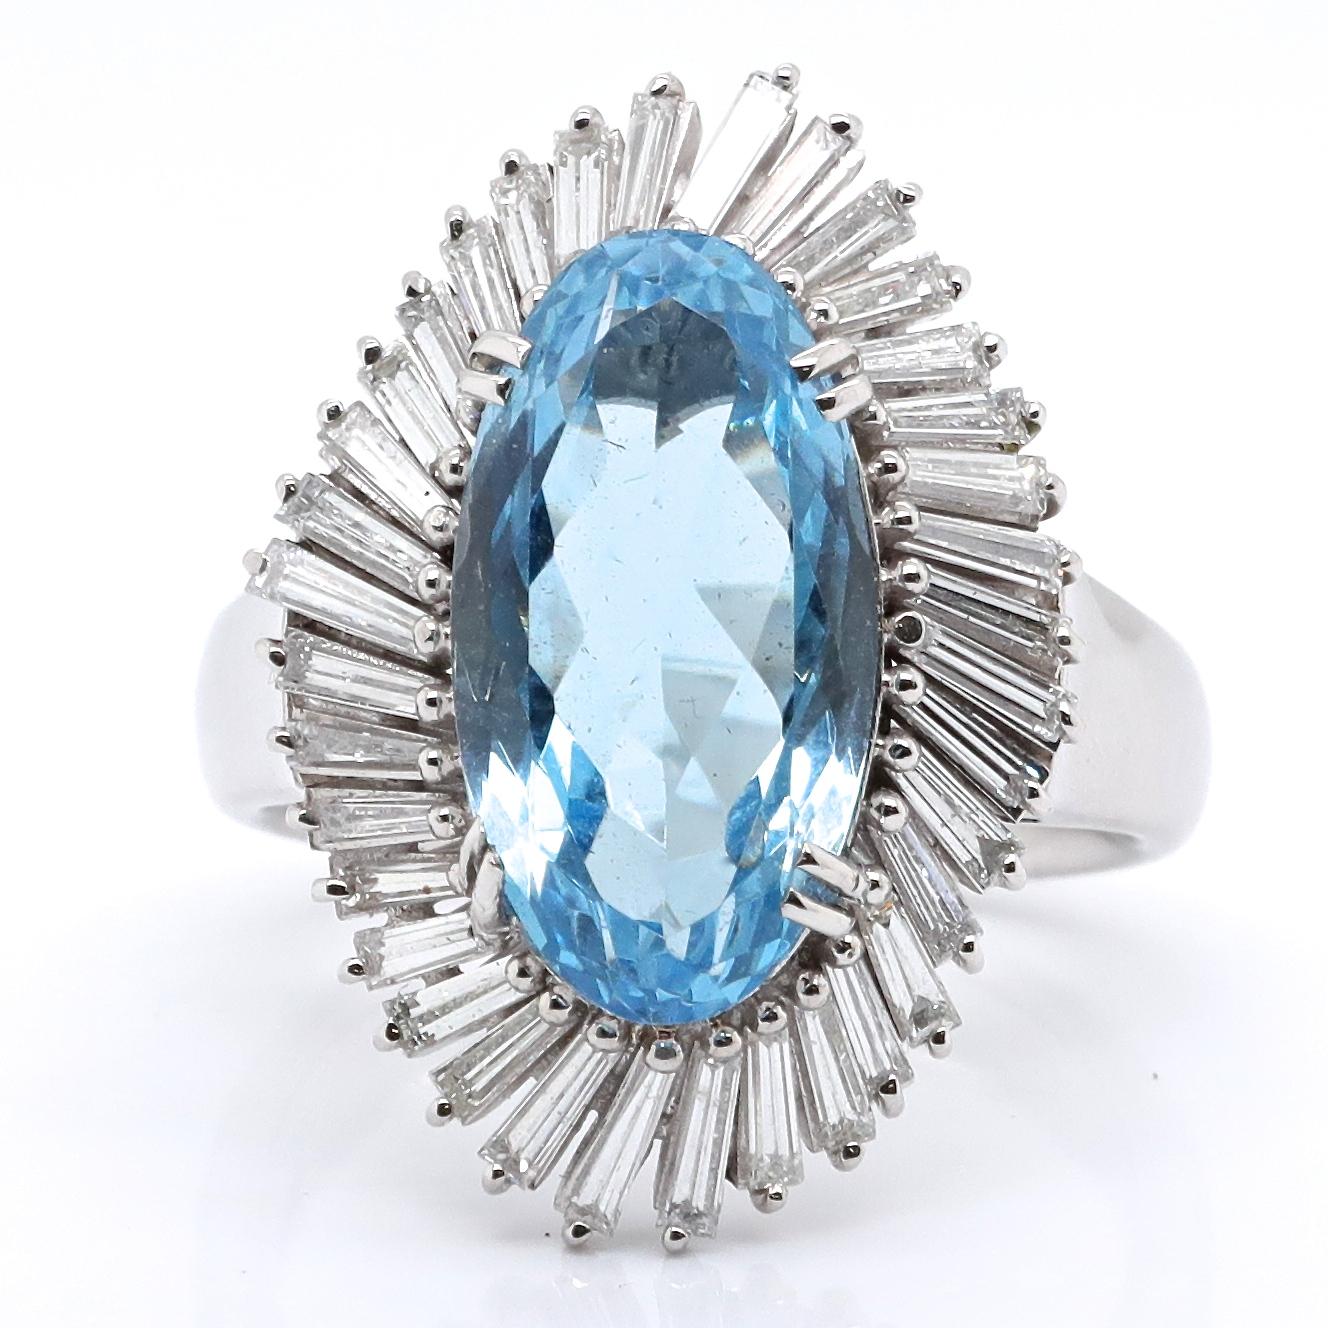 This ring is glamorous enough to be worn by a Hollywood star or a trendy newscaster. This is a desirable Vintage Aquamarine Diamond Platinum Ballerina Cluster Ring. The center stone is an Oval cut aquamarine, 6.48 carats. Accompanied by 36 tapered